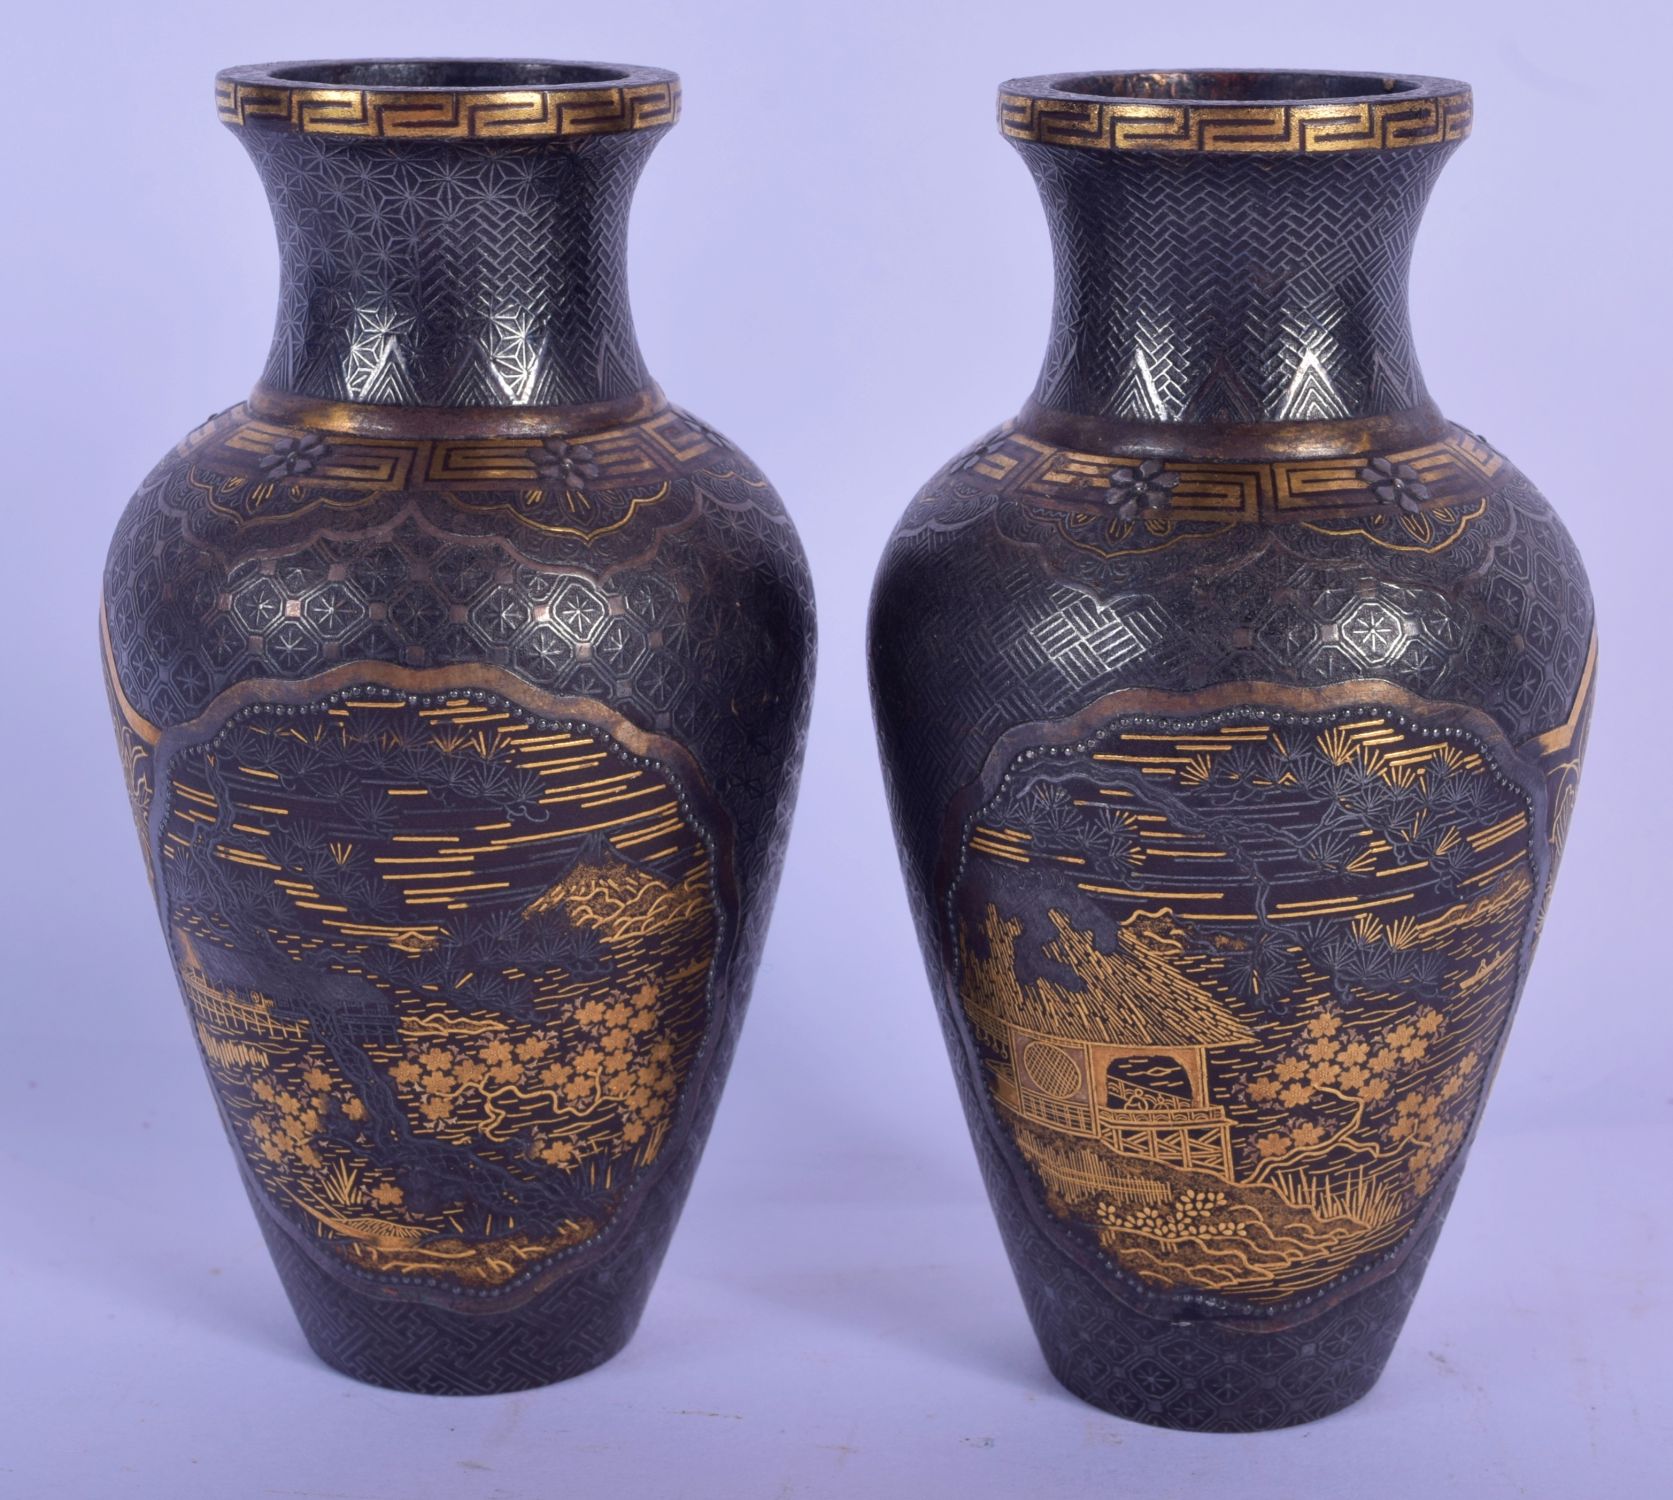 A LOVELY PAIR OF 19TH CENTURY MEIJI PERIOD GOLD AND SILVER INLAID KOMAI VASES decorated with birds a - Image 2 of 6